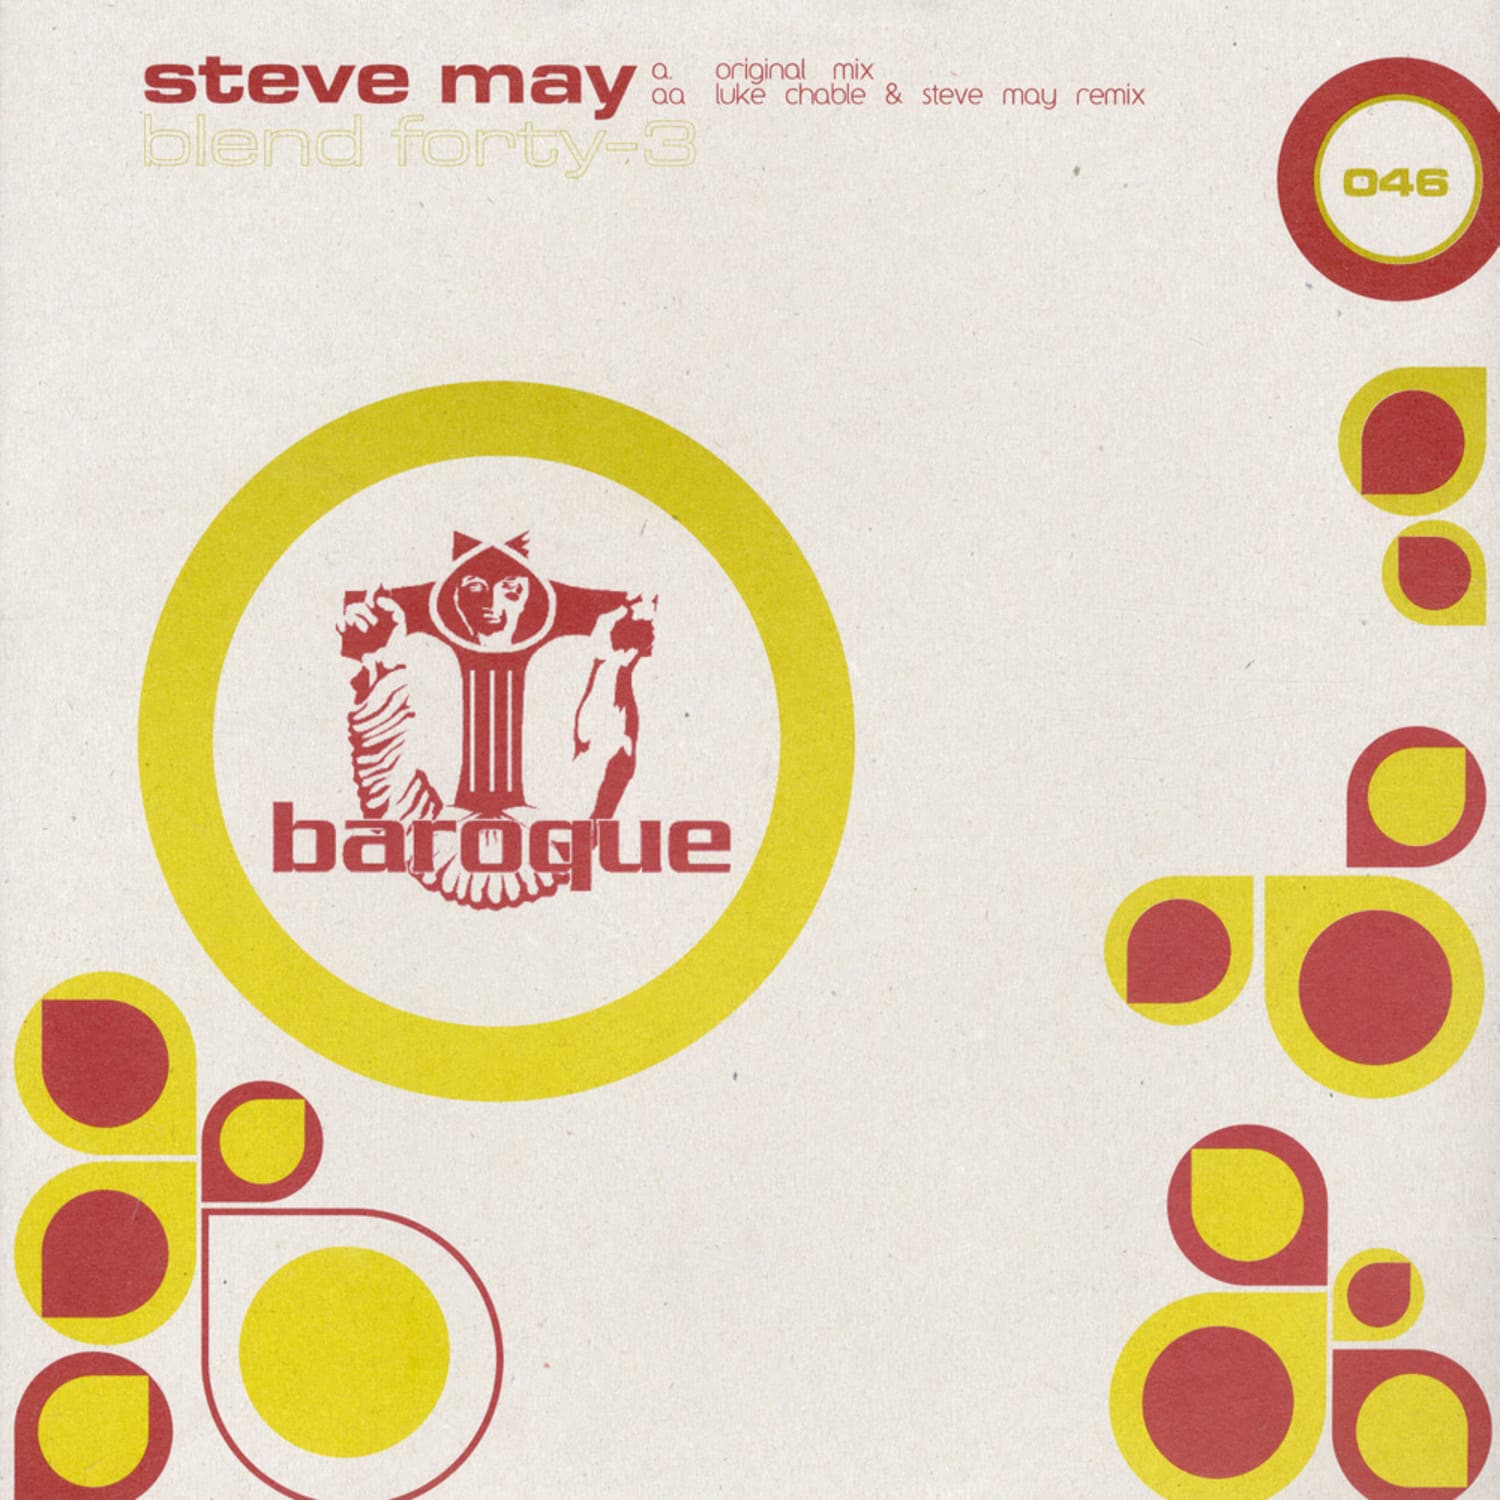 Steve May - BLEND FORTY-3